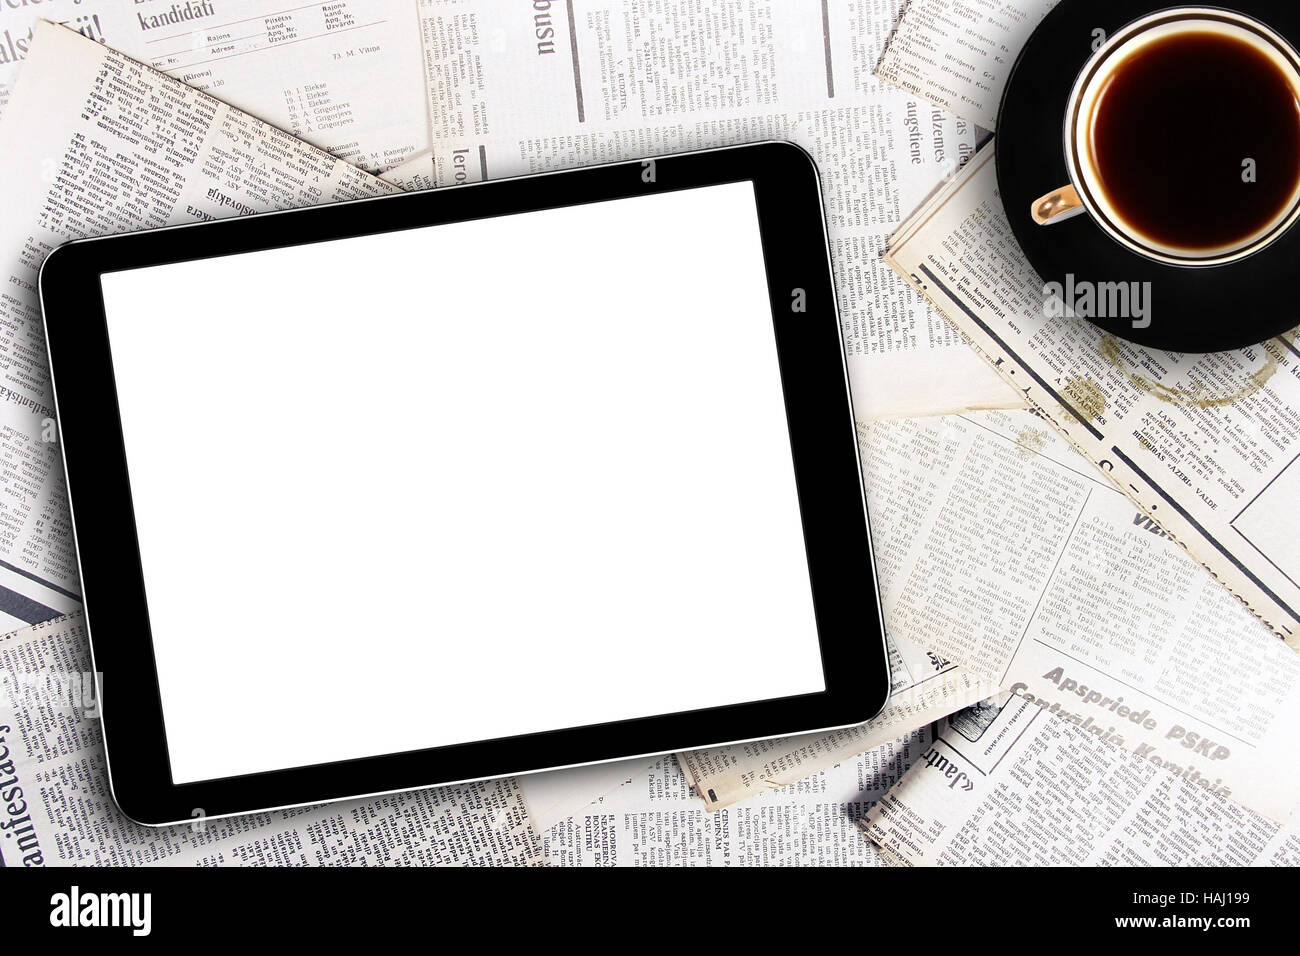 digital tablet and coffee cup on newspapers Stock Photo